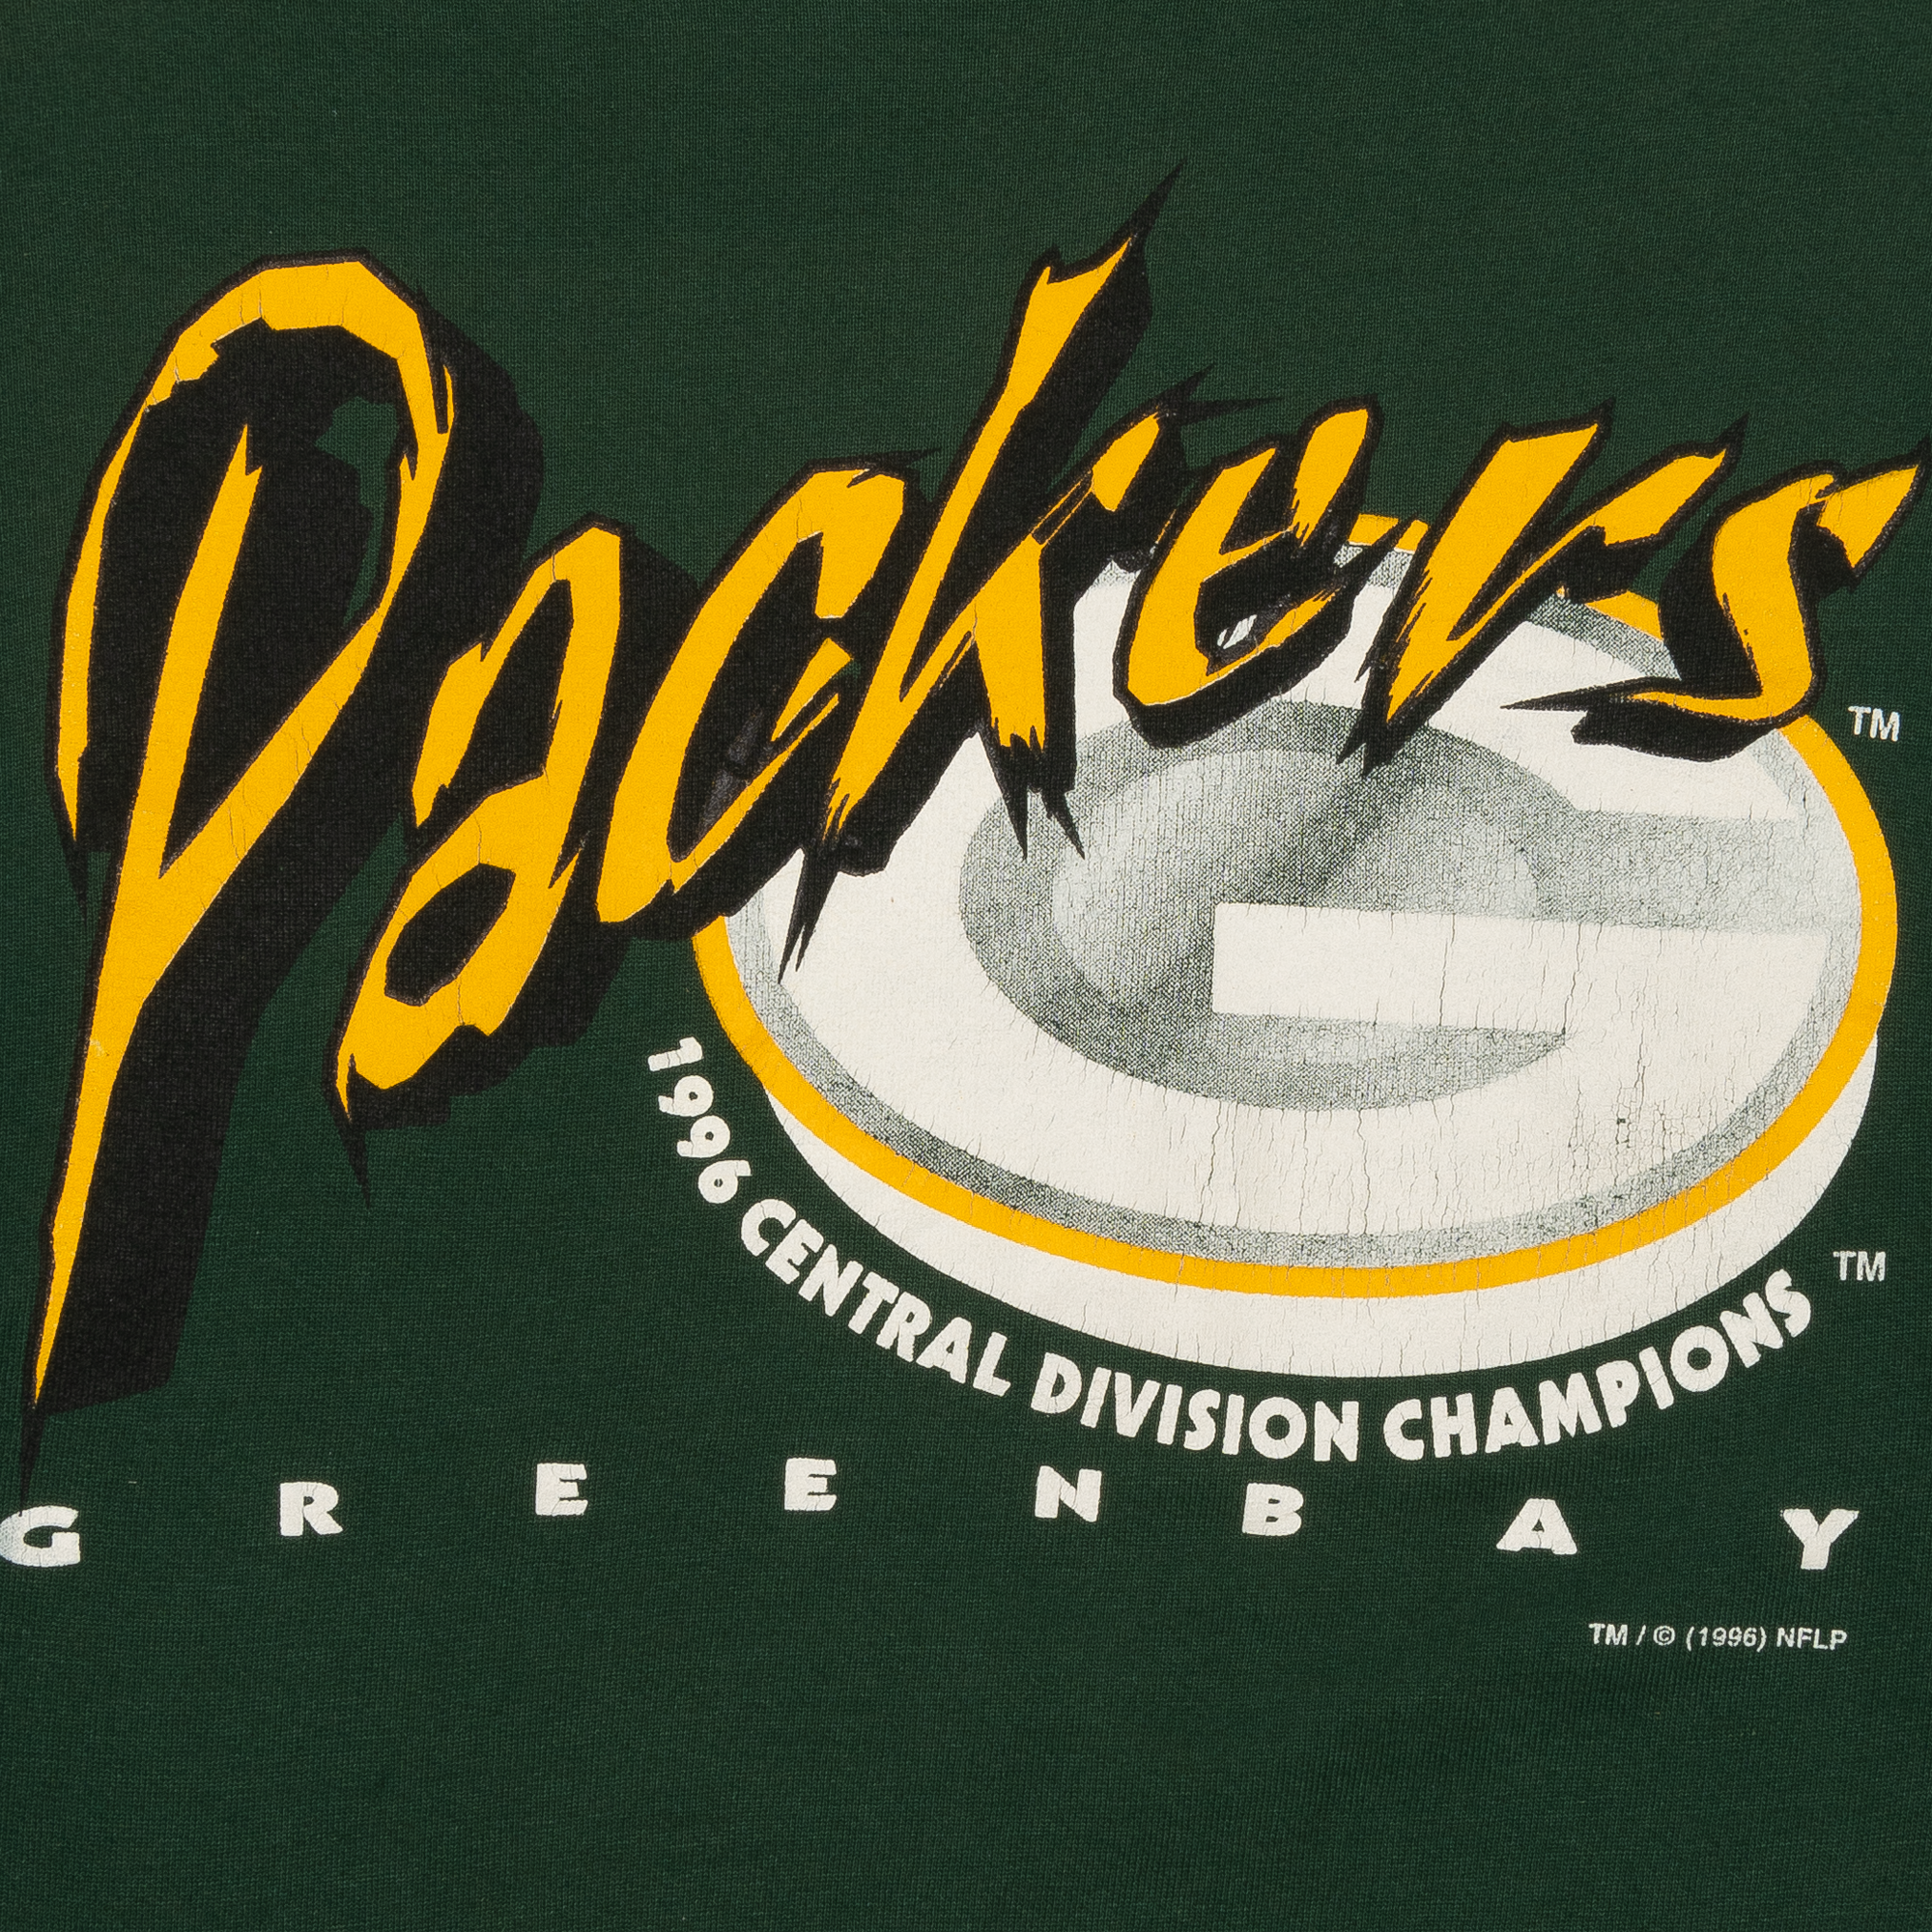 Green Bay Packers "Central Division Champs" 1996 NFL Crewneck Green-PLUS